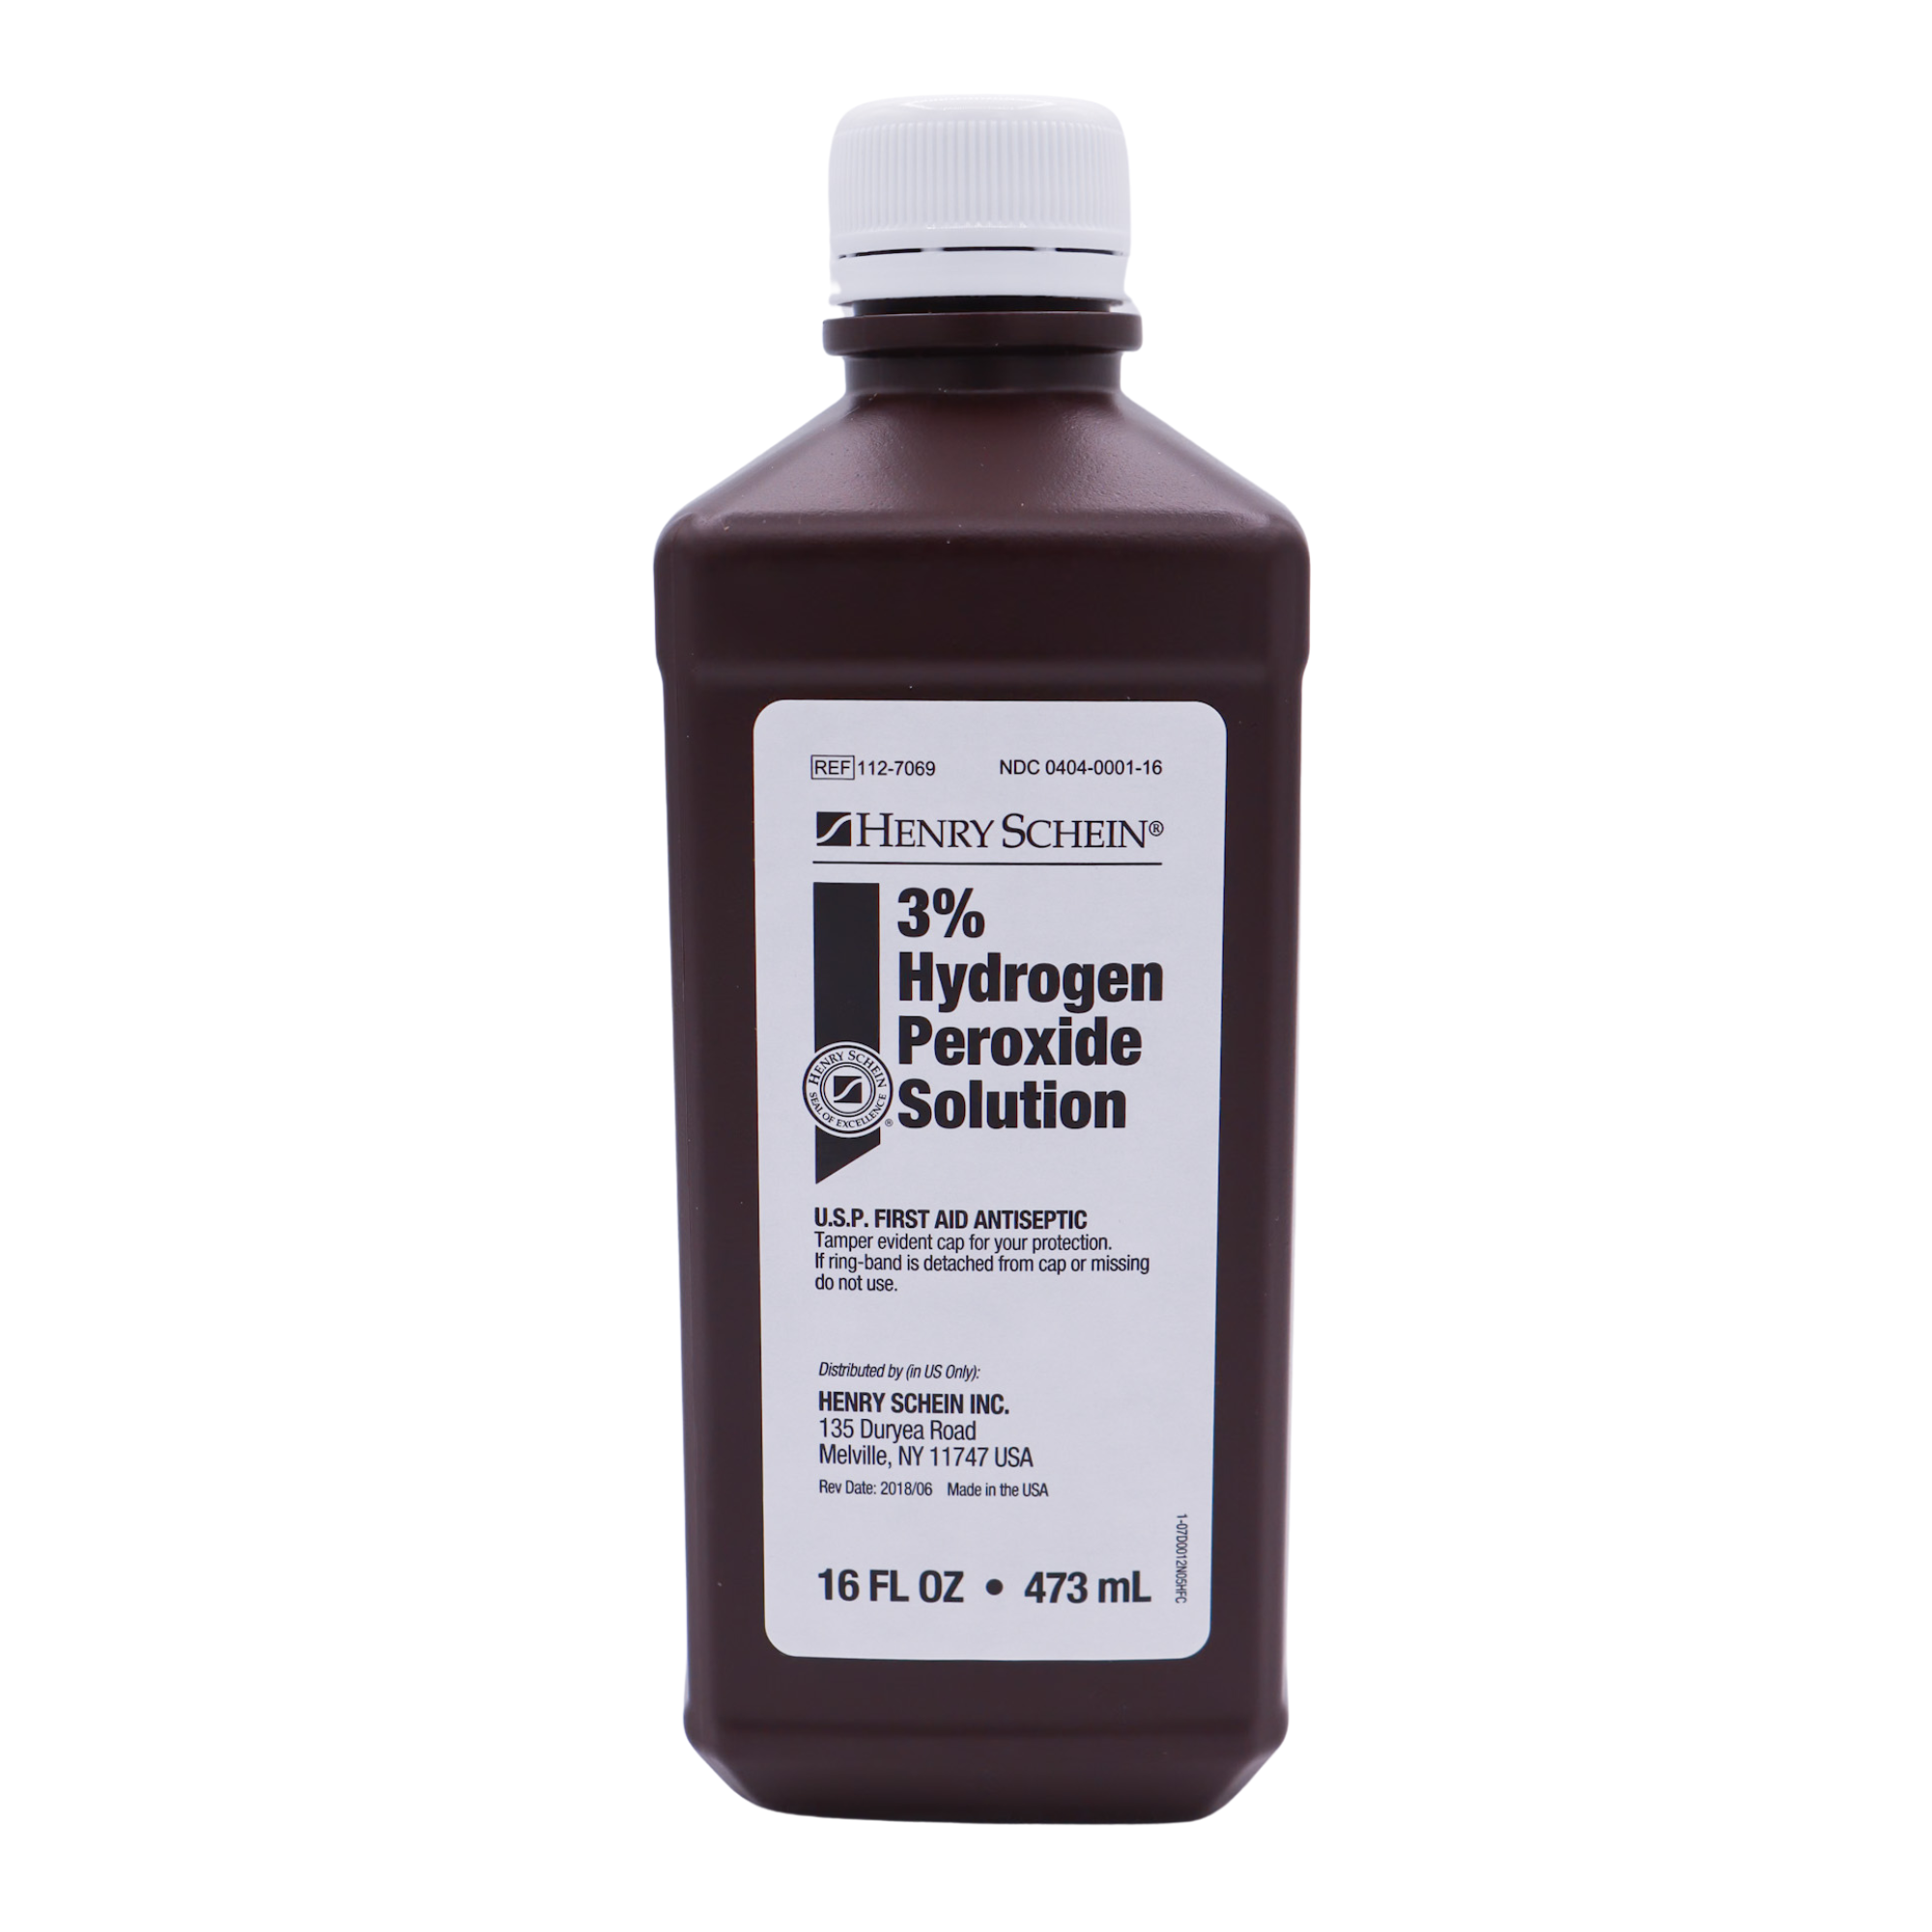 Henry Schein 3% Hydrogen Peroxide Solution - 16 fl oz | USP First Aid Antiseptic for Wounds, Cuts, and Minor Injuries